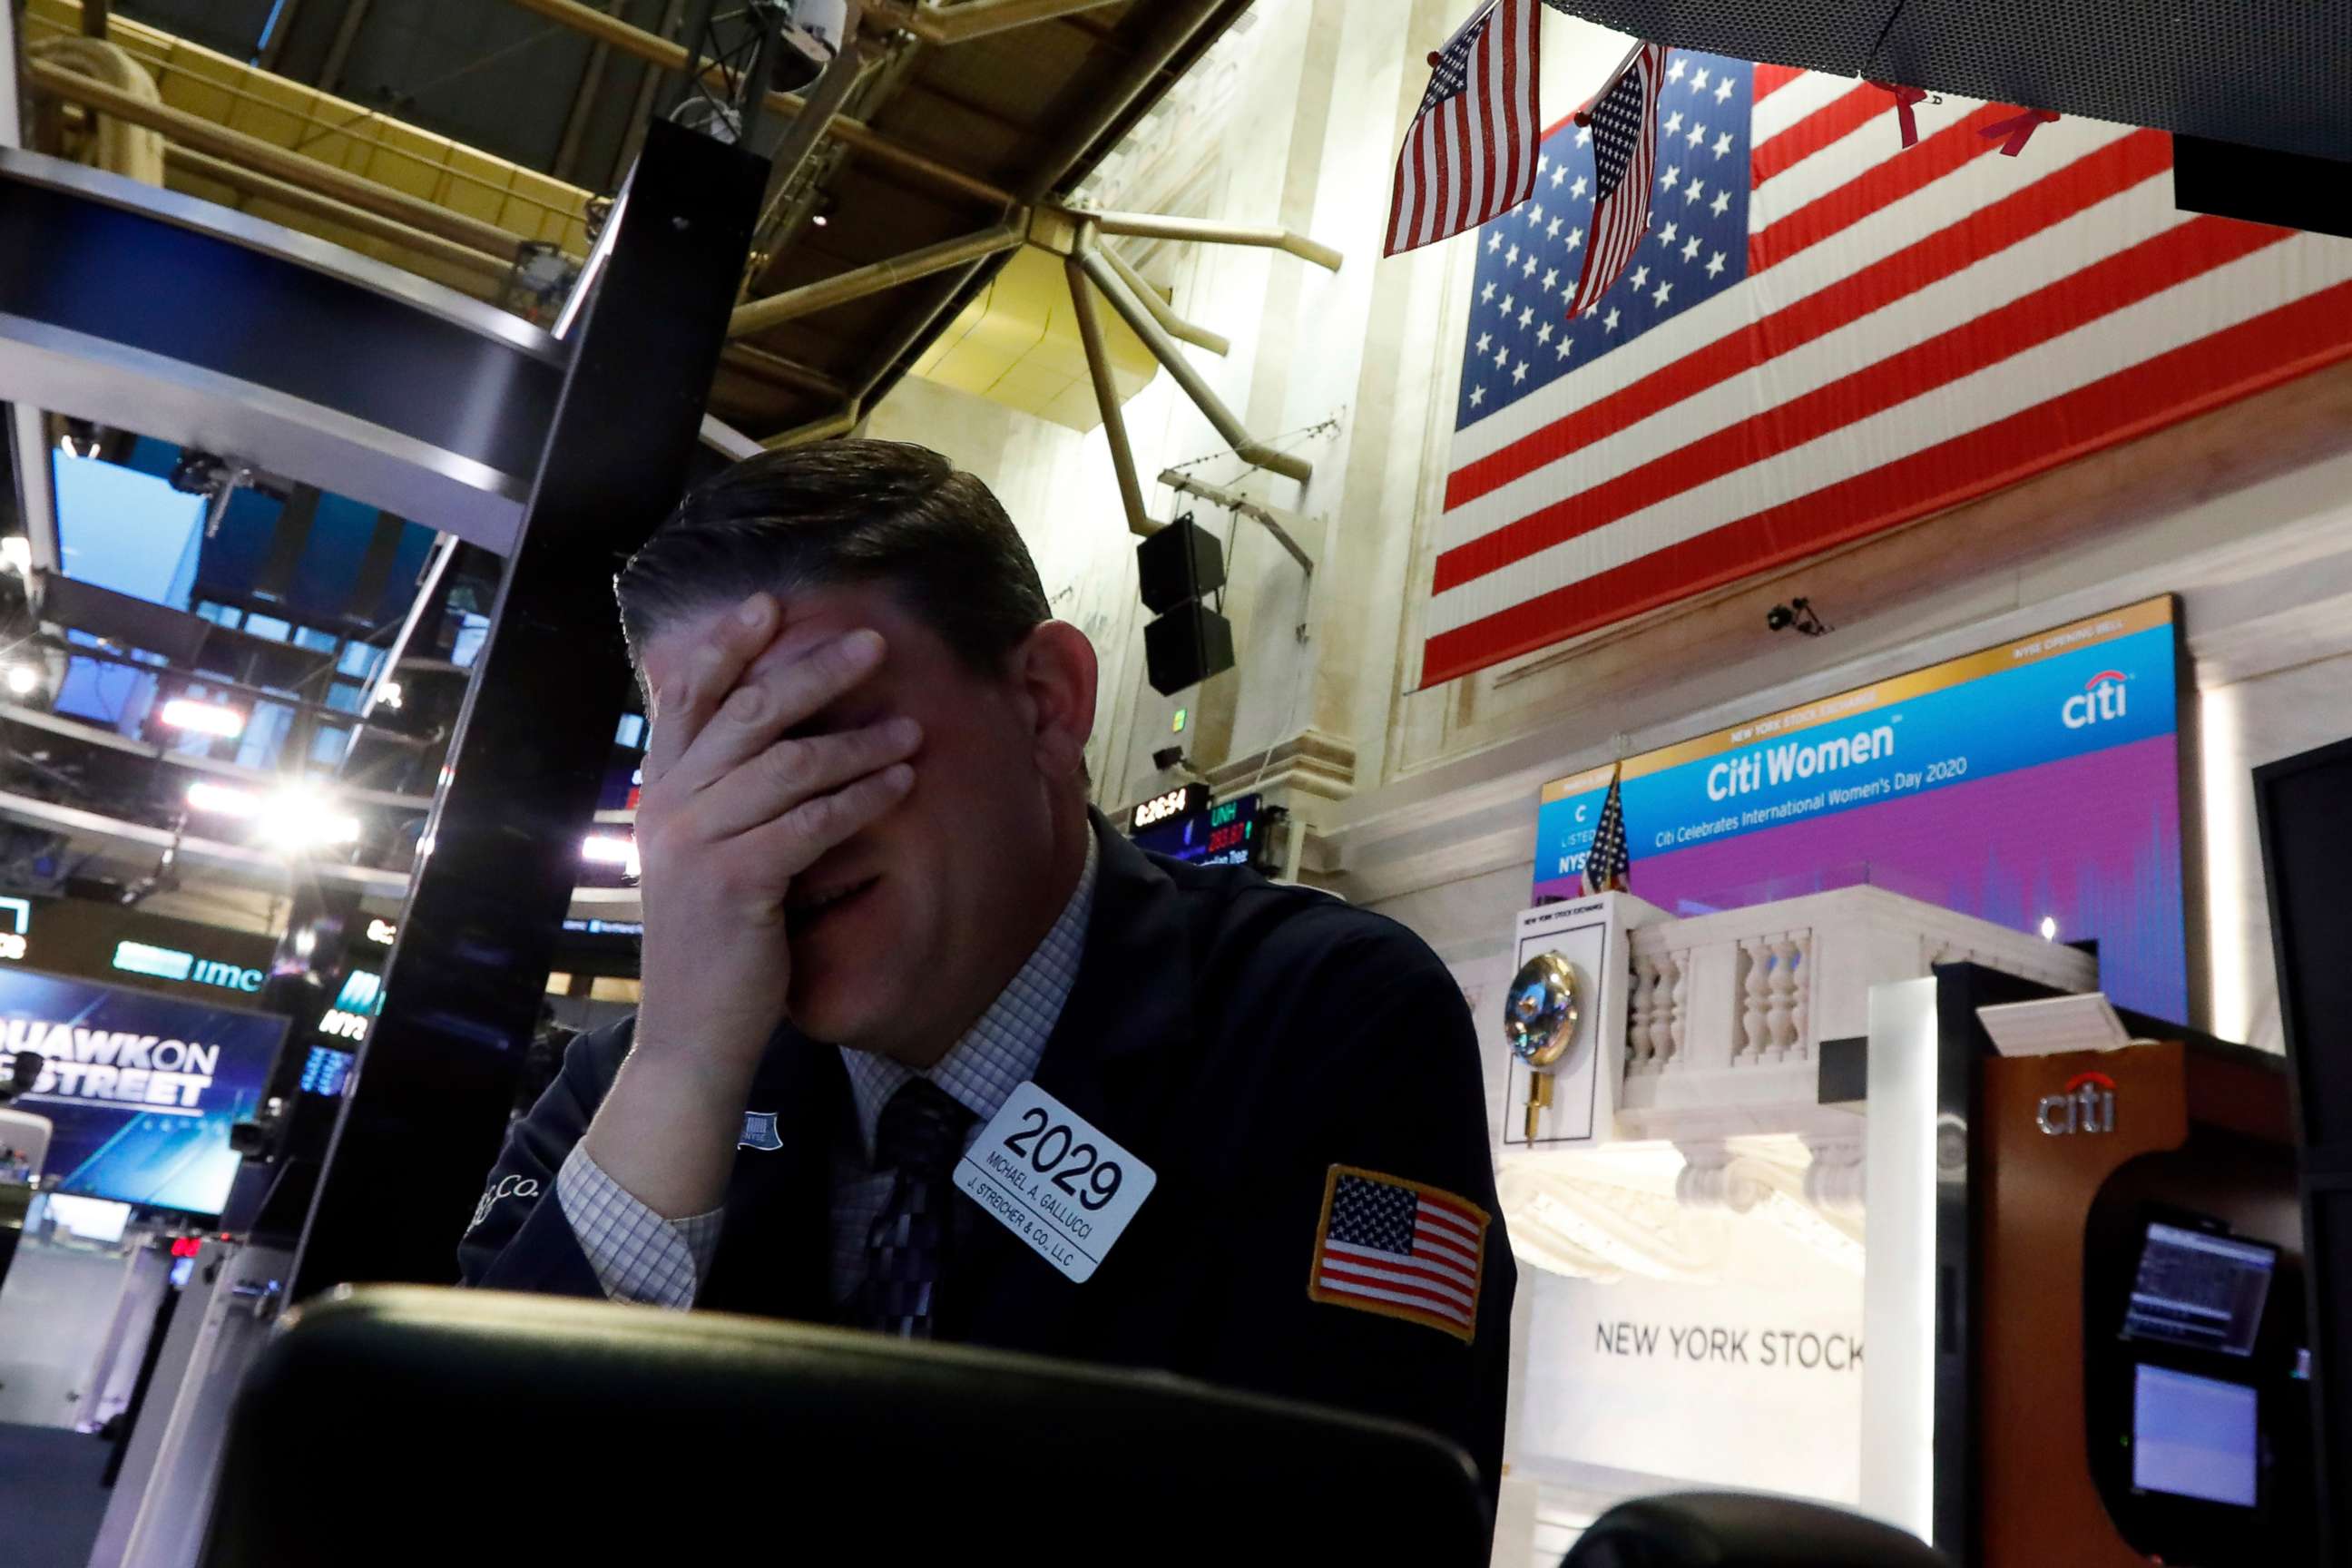 PHOTO: Trader Michael Gallucci prepares for the day's activity on the floor of the New York Stock Exchange, March 9, 2020.